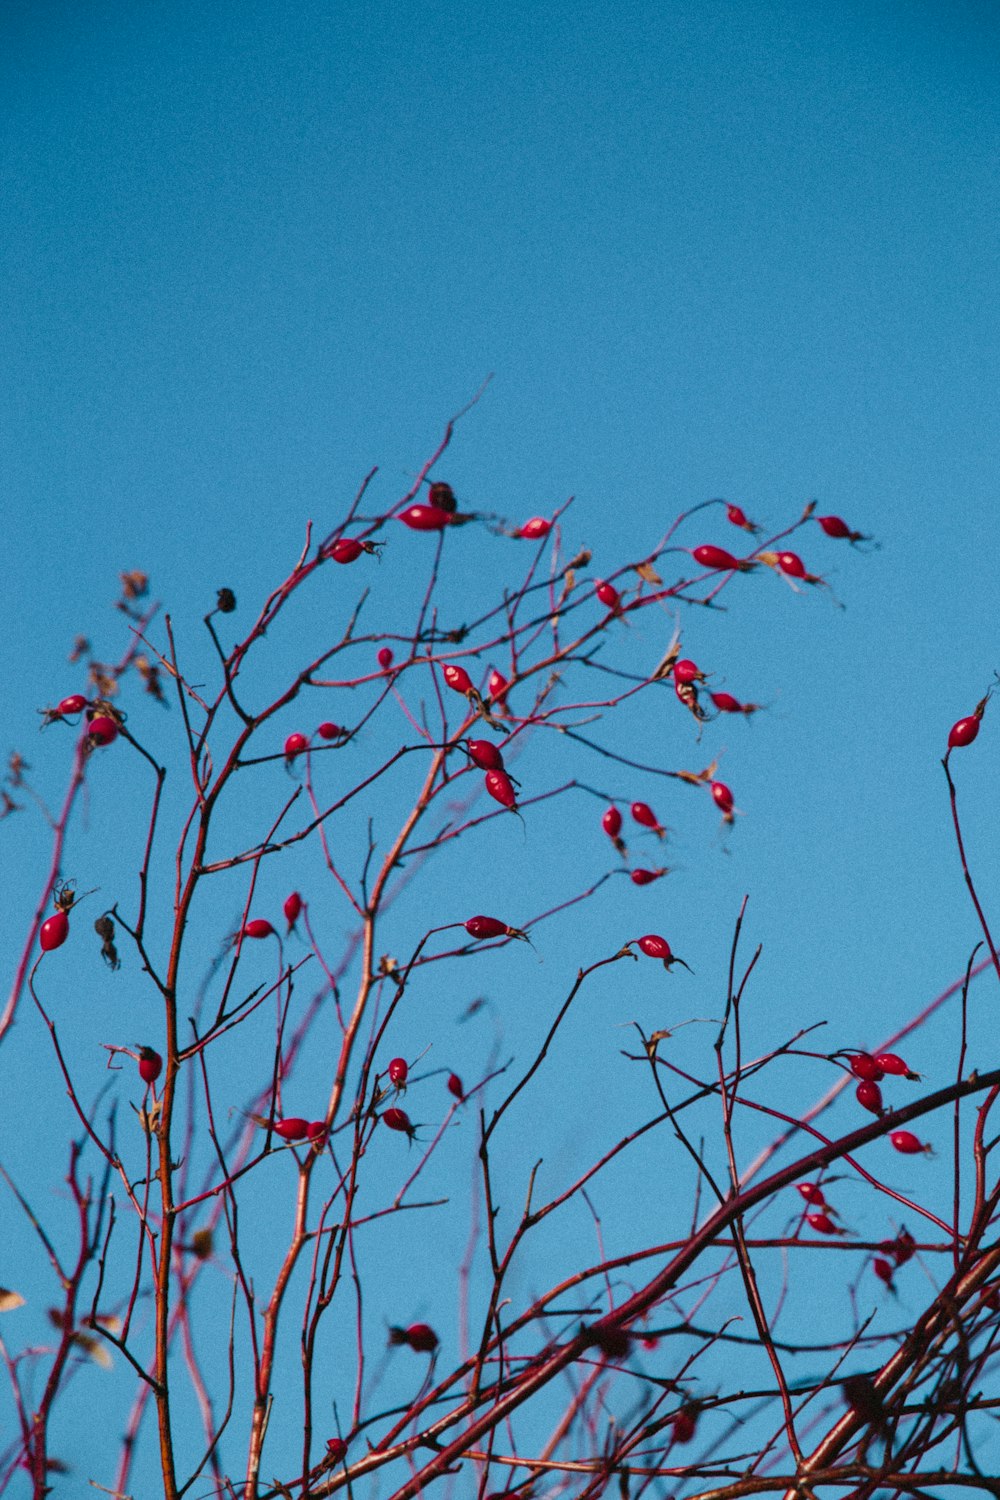 red round fruits on tree branch under blue sky during daytime